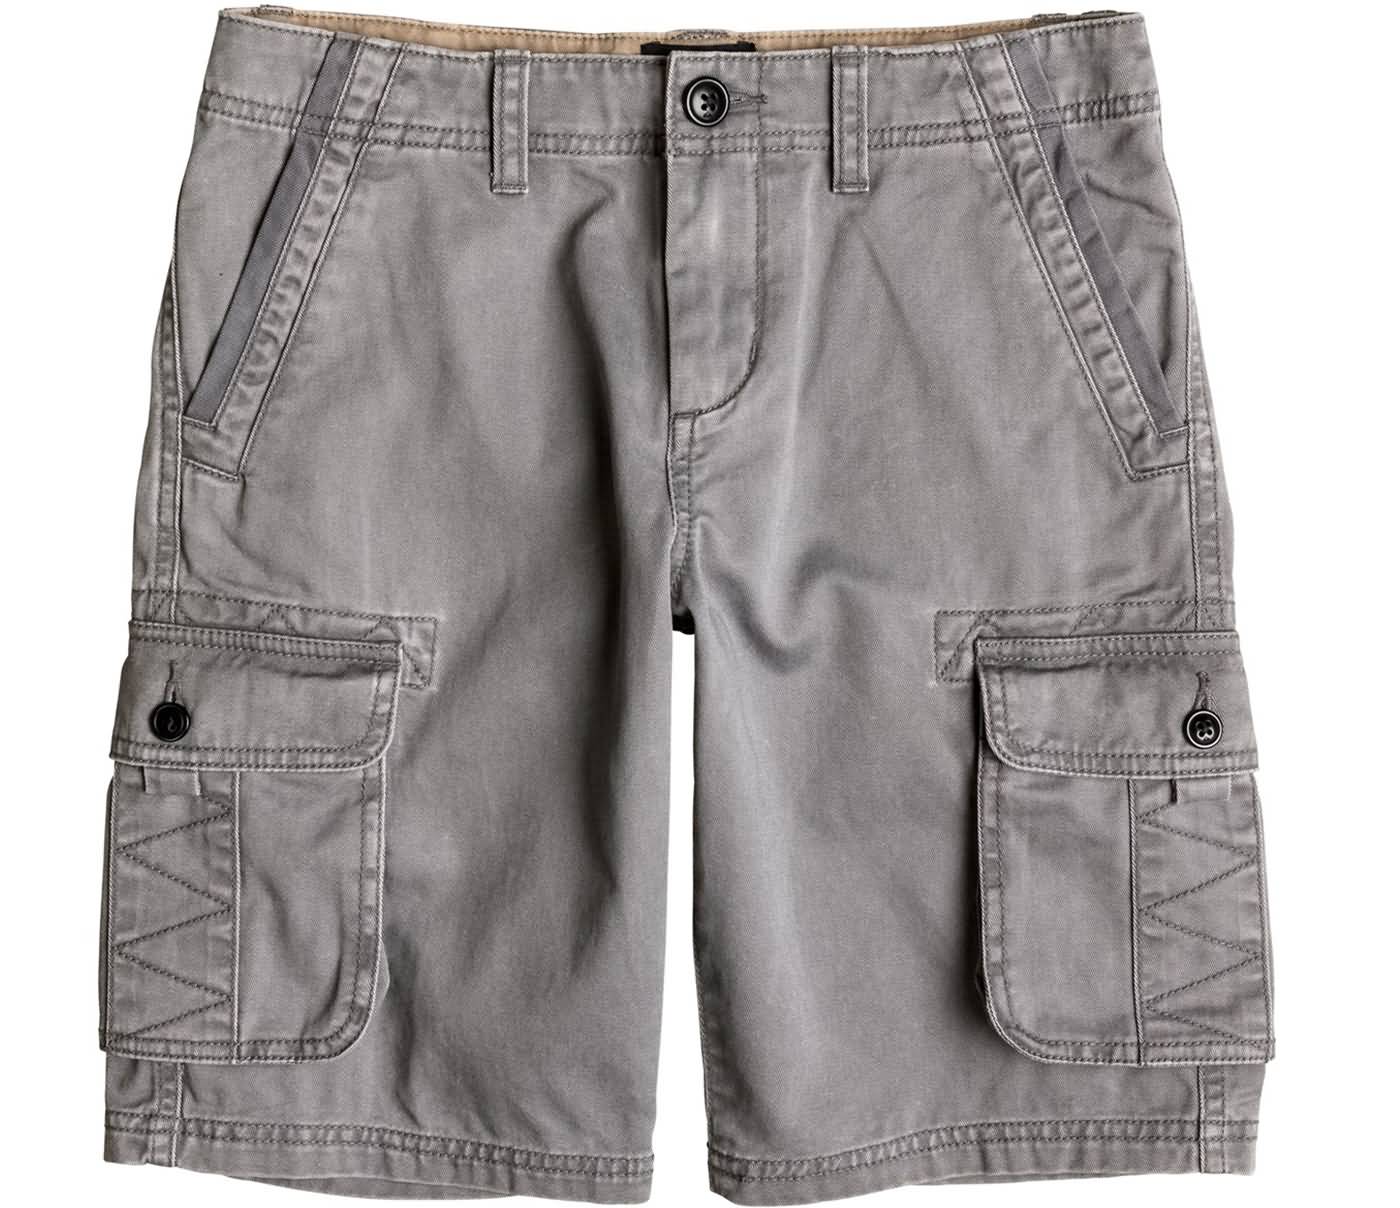 Quiksilver Surf Fall 2017 Youth Boys Lifestyle Walkshorts Preview